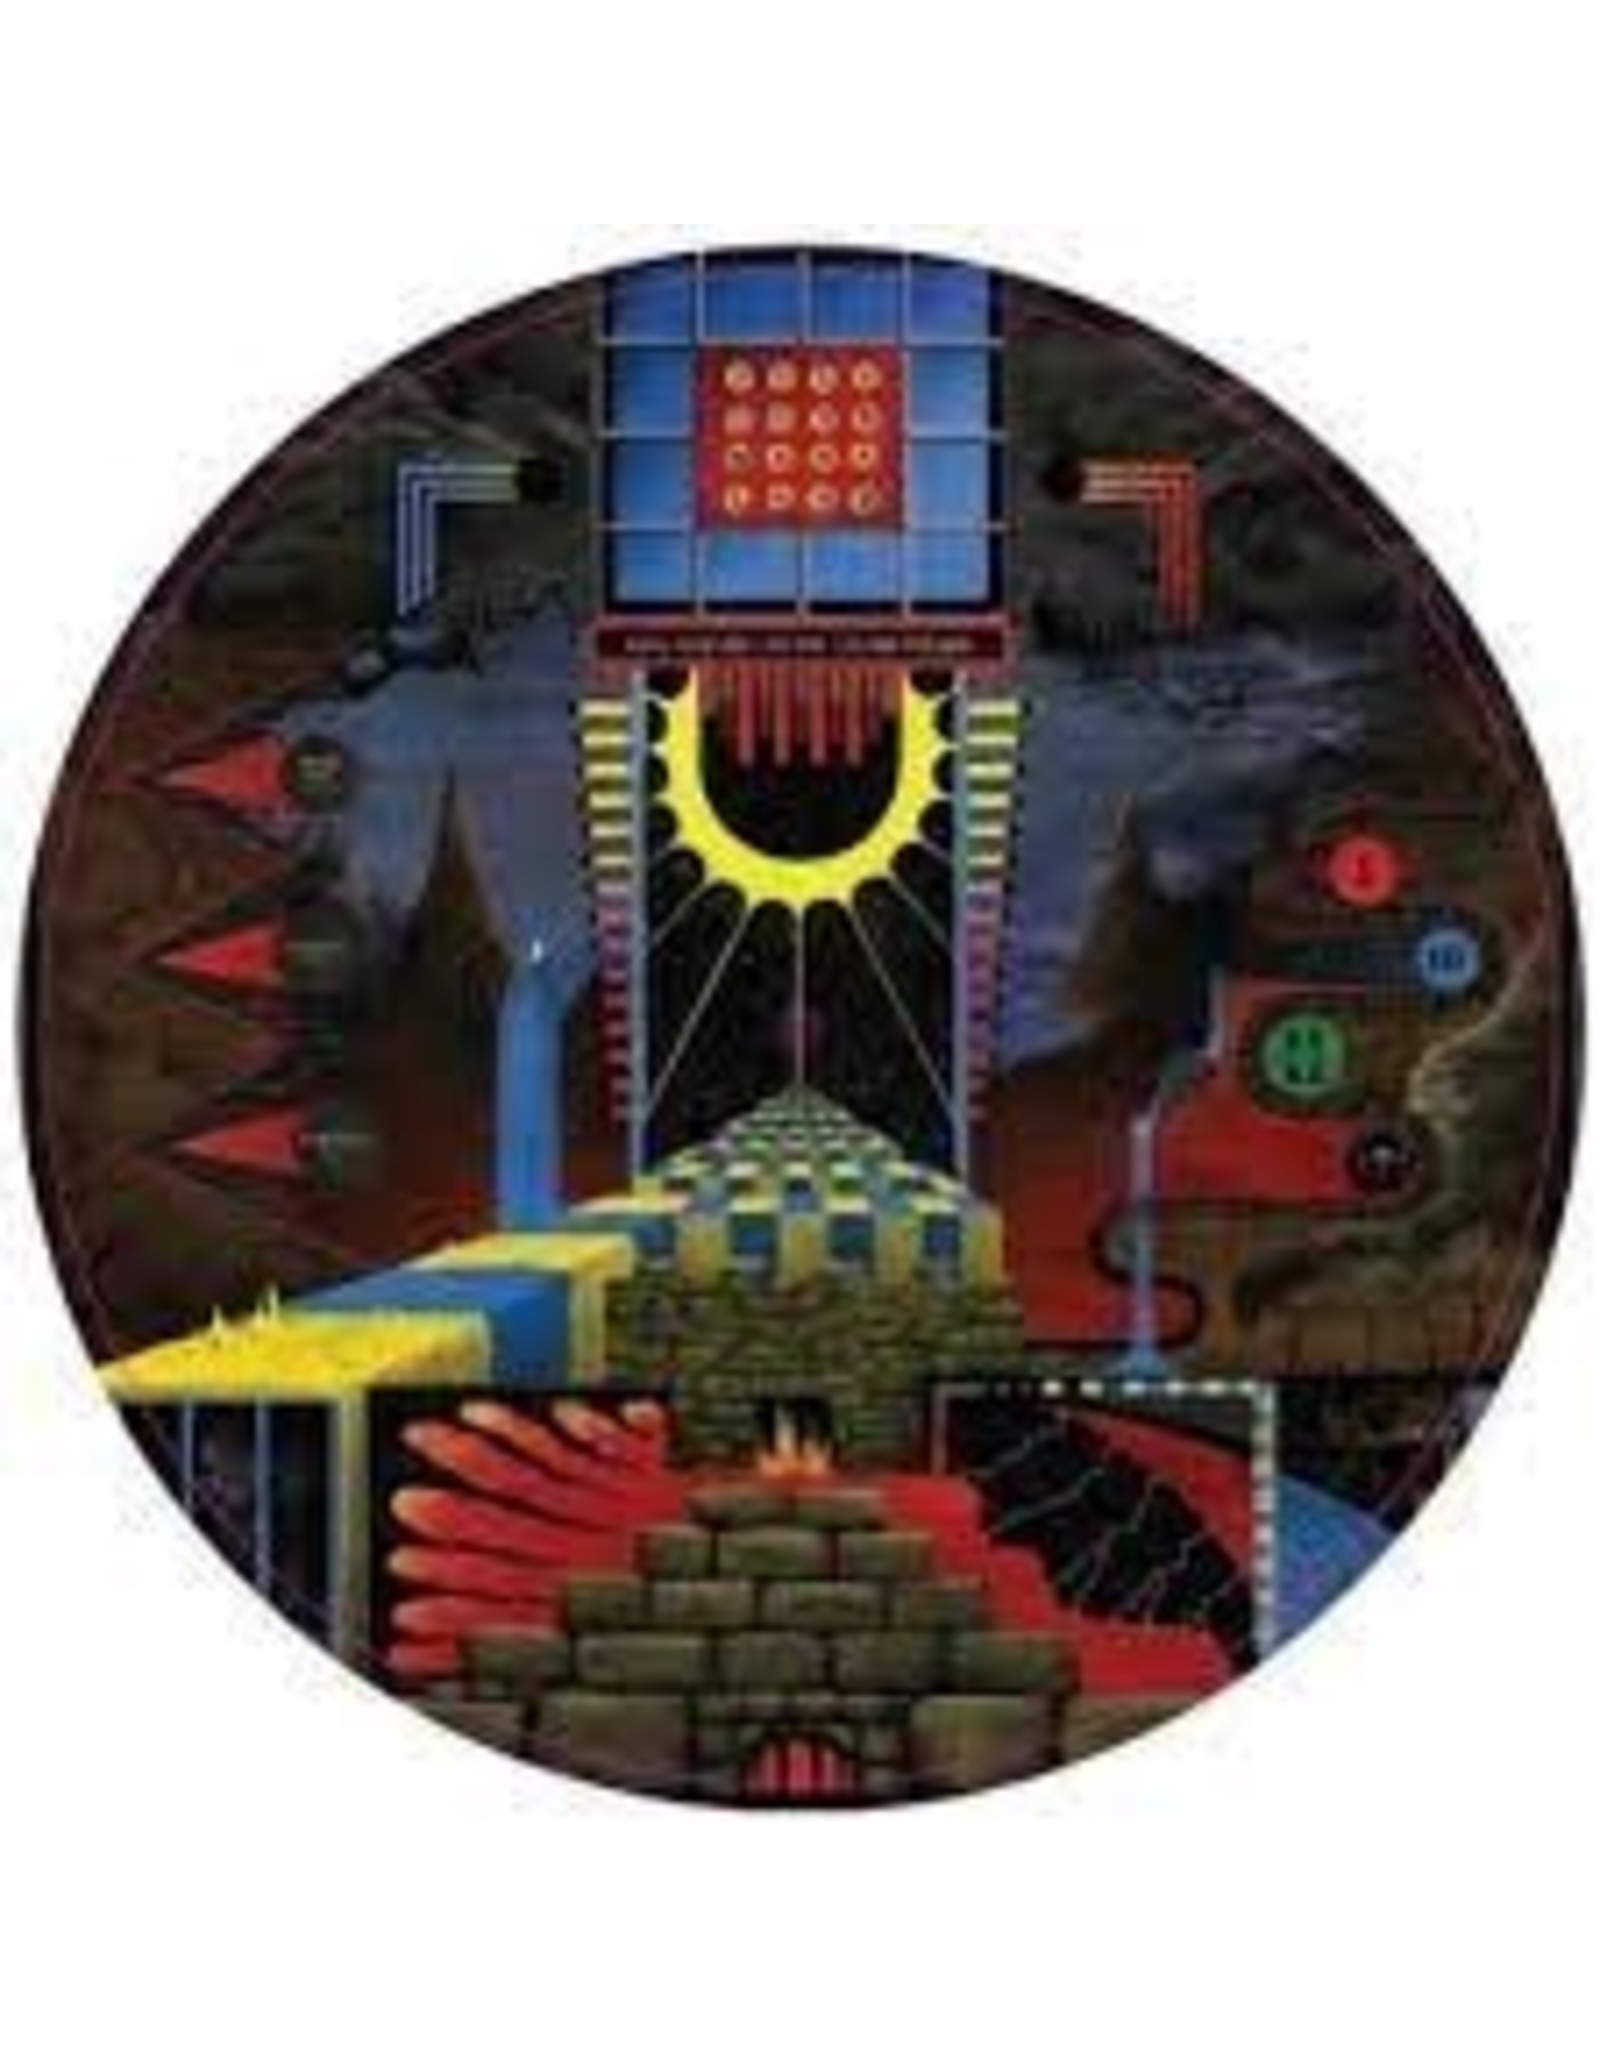 King Gizzard and The Wizard Lizard - Polygondwanaland (Picture Disc) LP